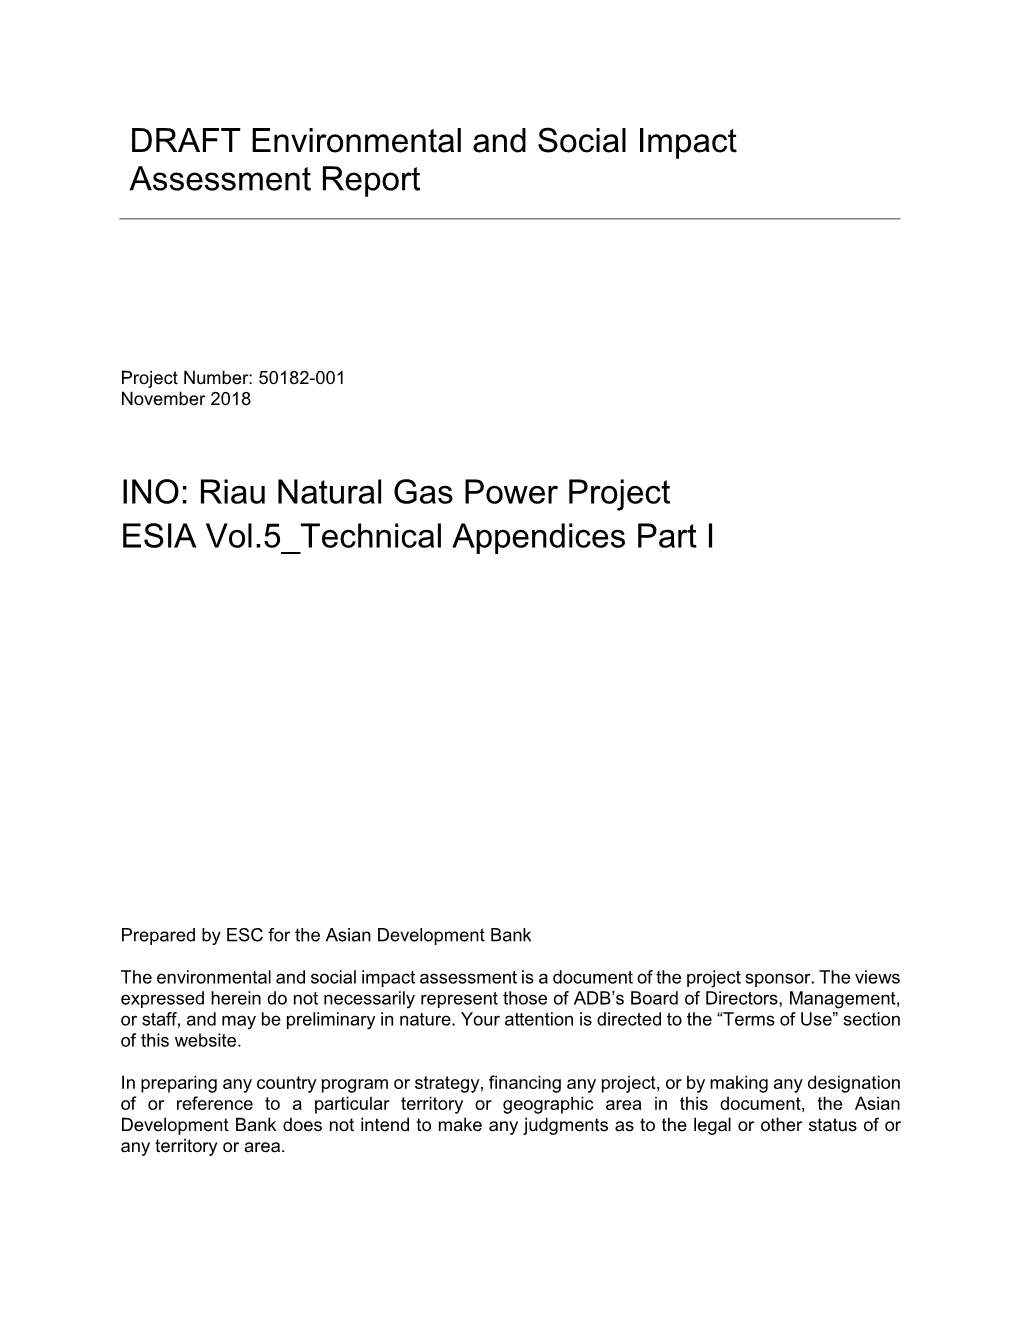 DRAFT Environmental and Social Impact Assessment Report INO: Riau Natural Gas Power Project ESIA Vol.5 Technical Appendices Part